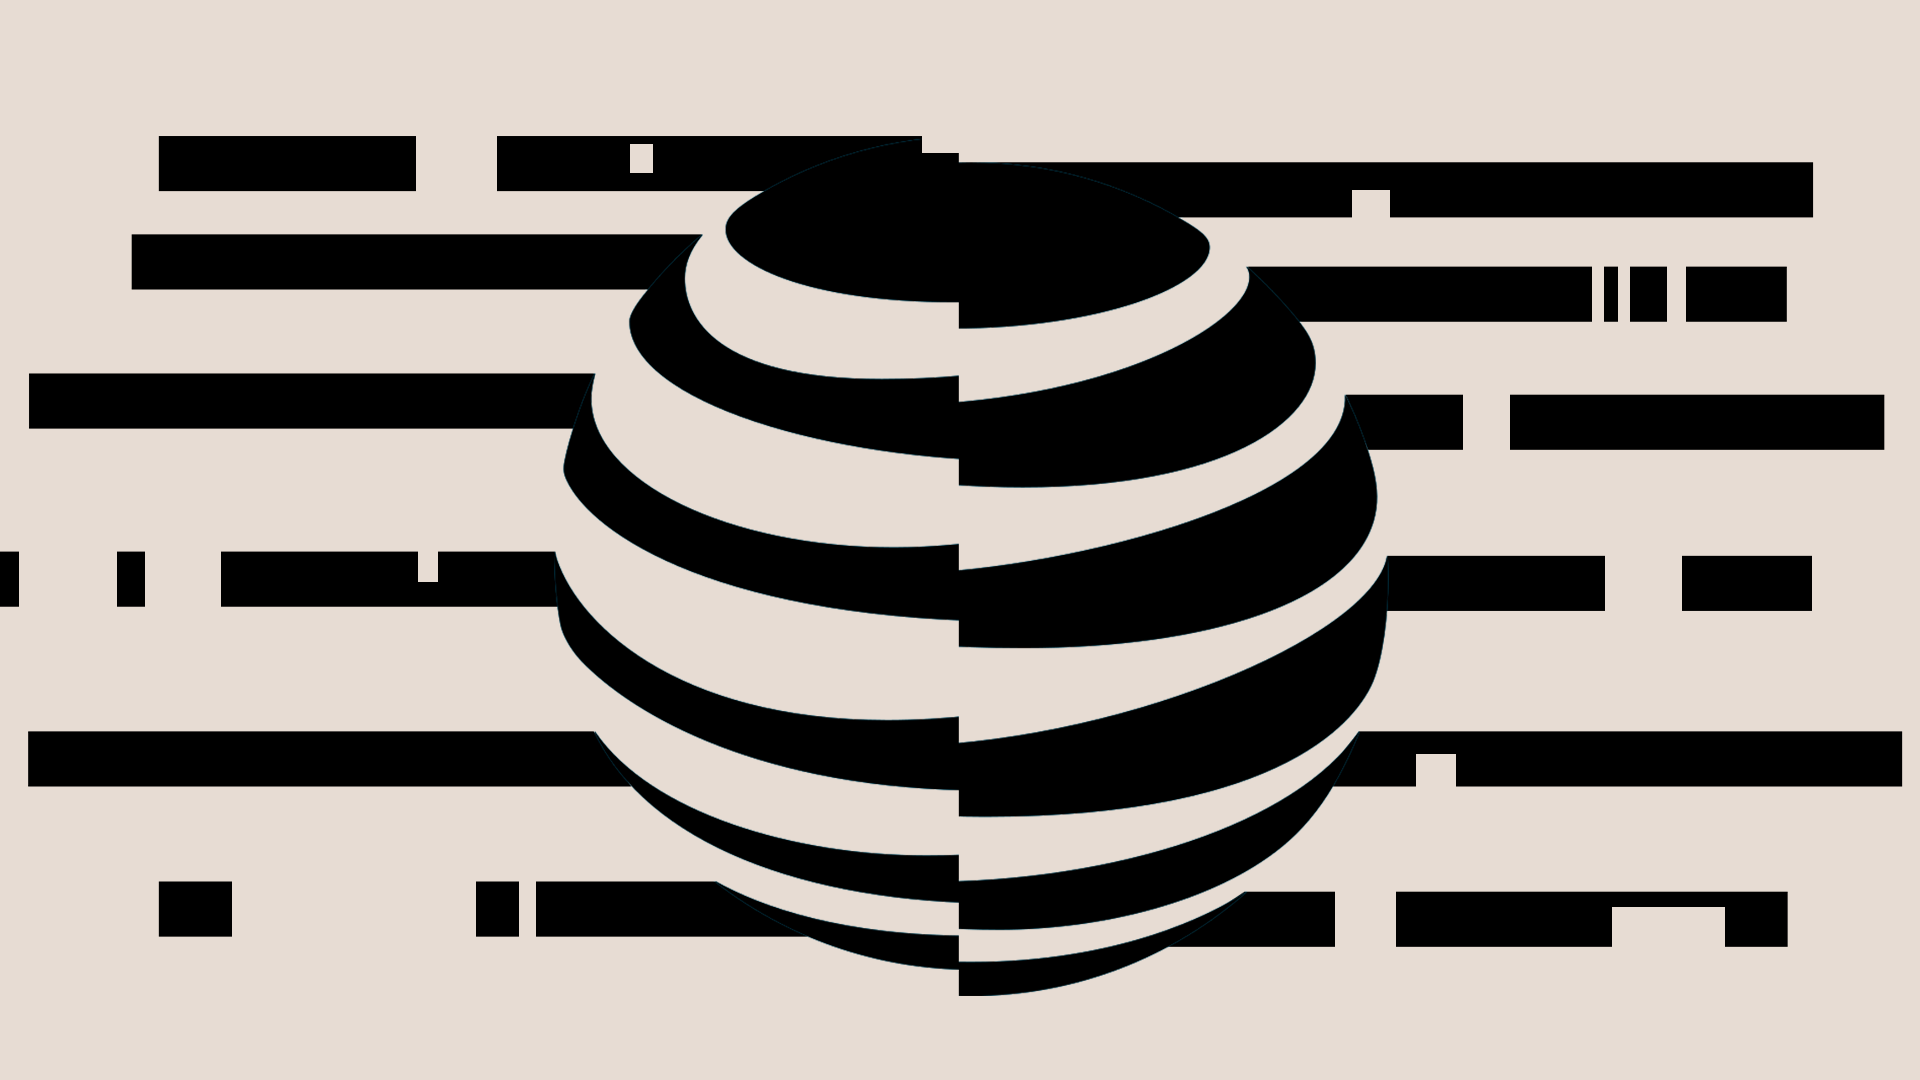 AT&T globe logo fractured 